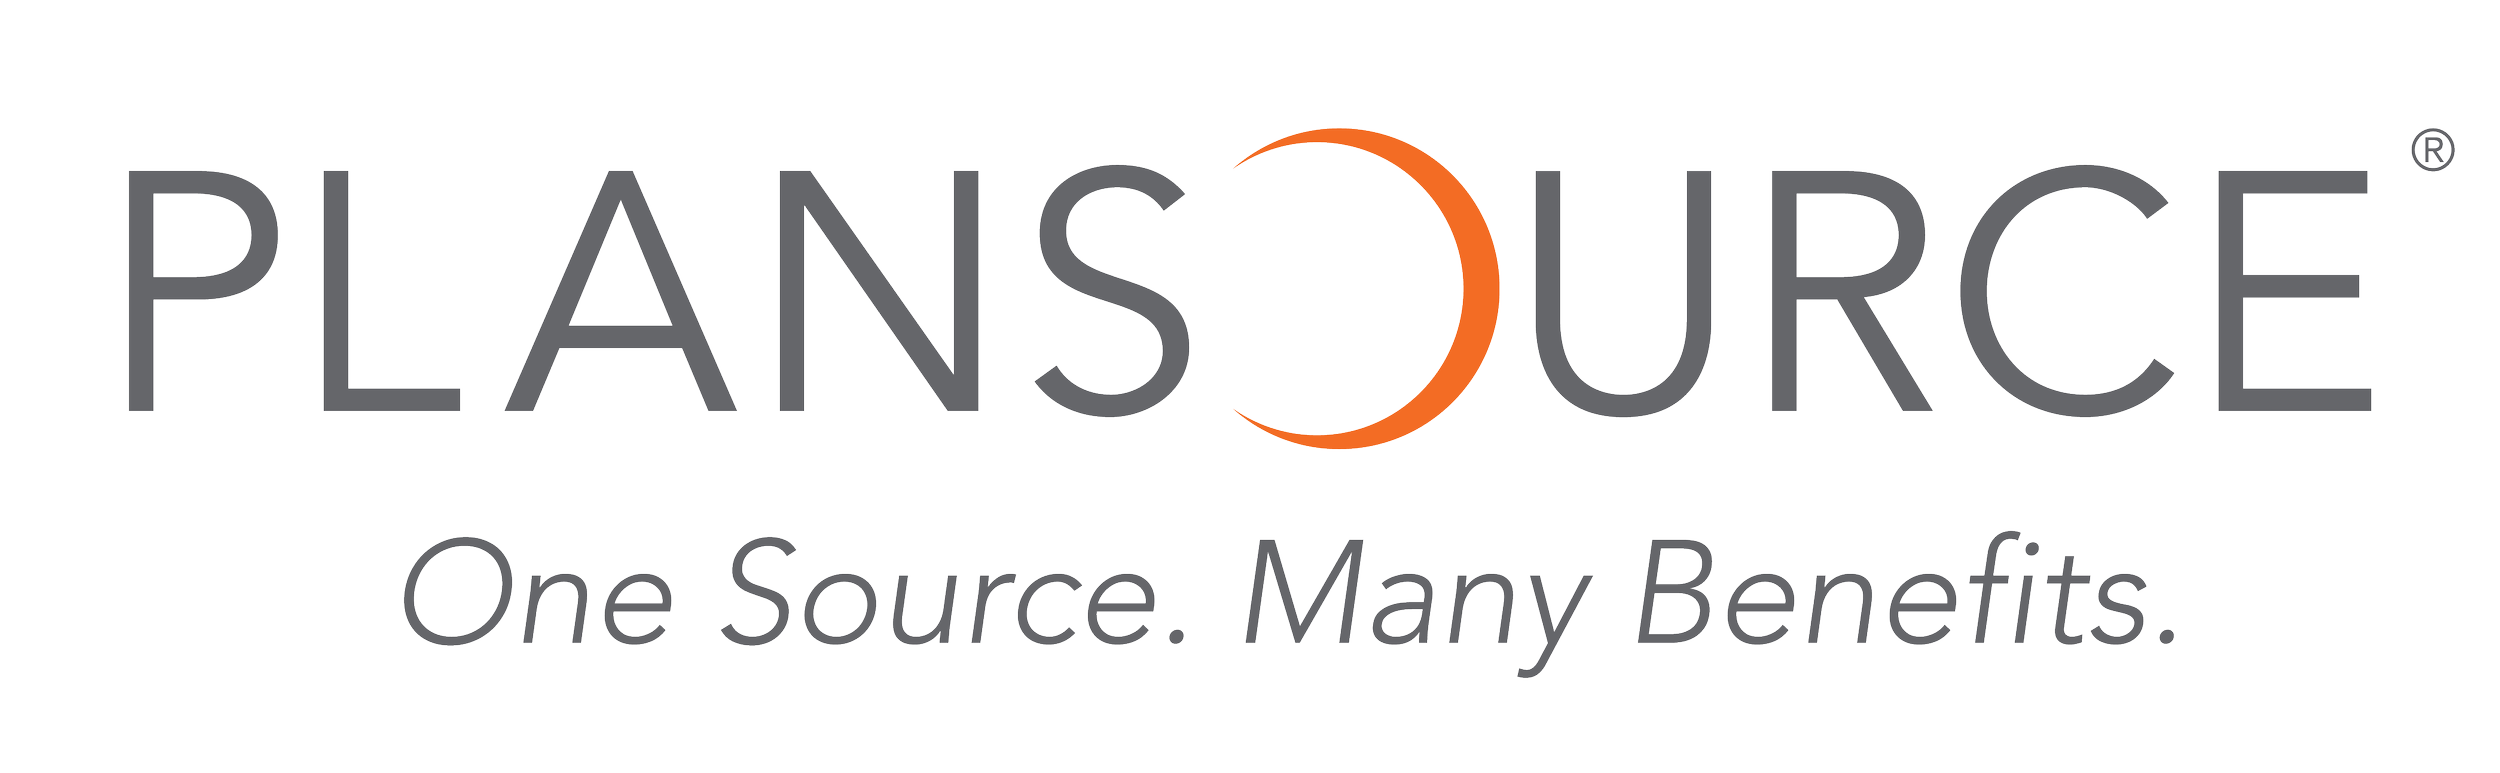 PlanSource_Logo.png